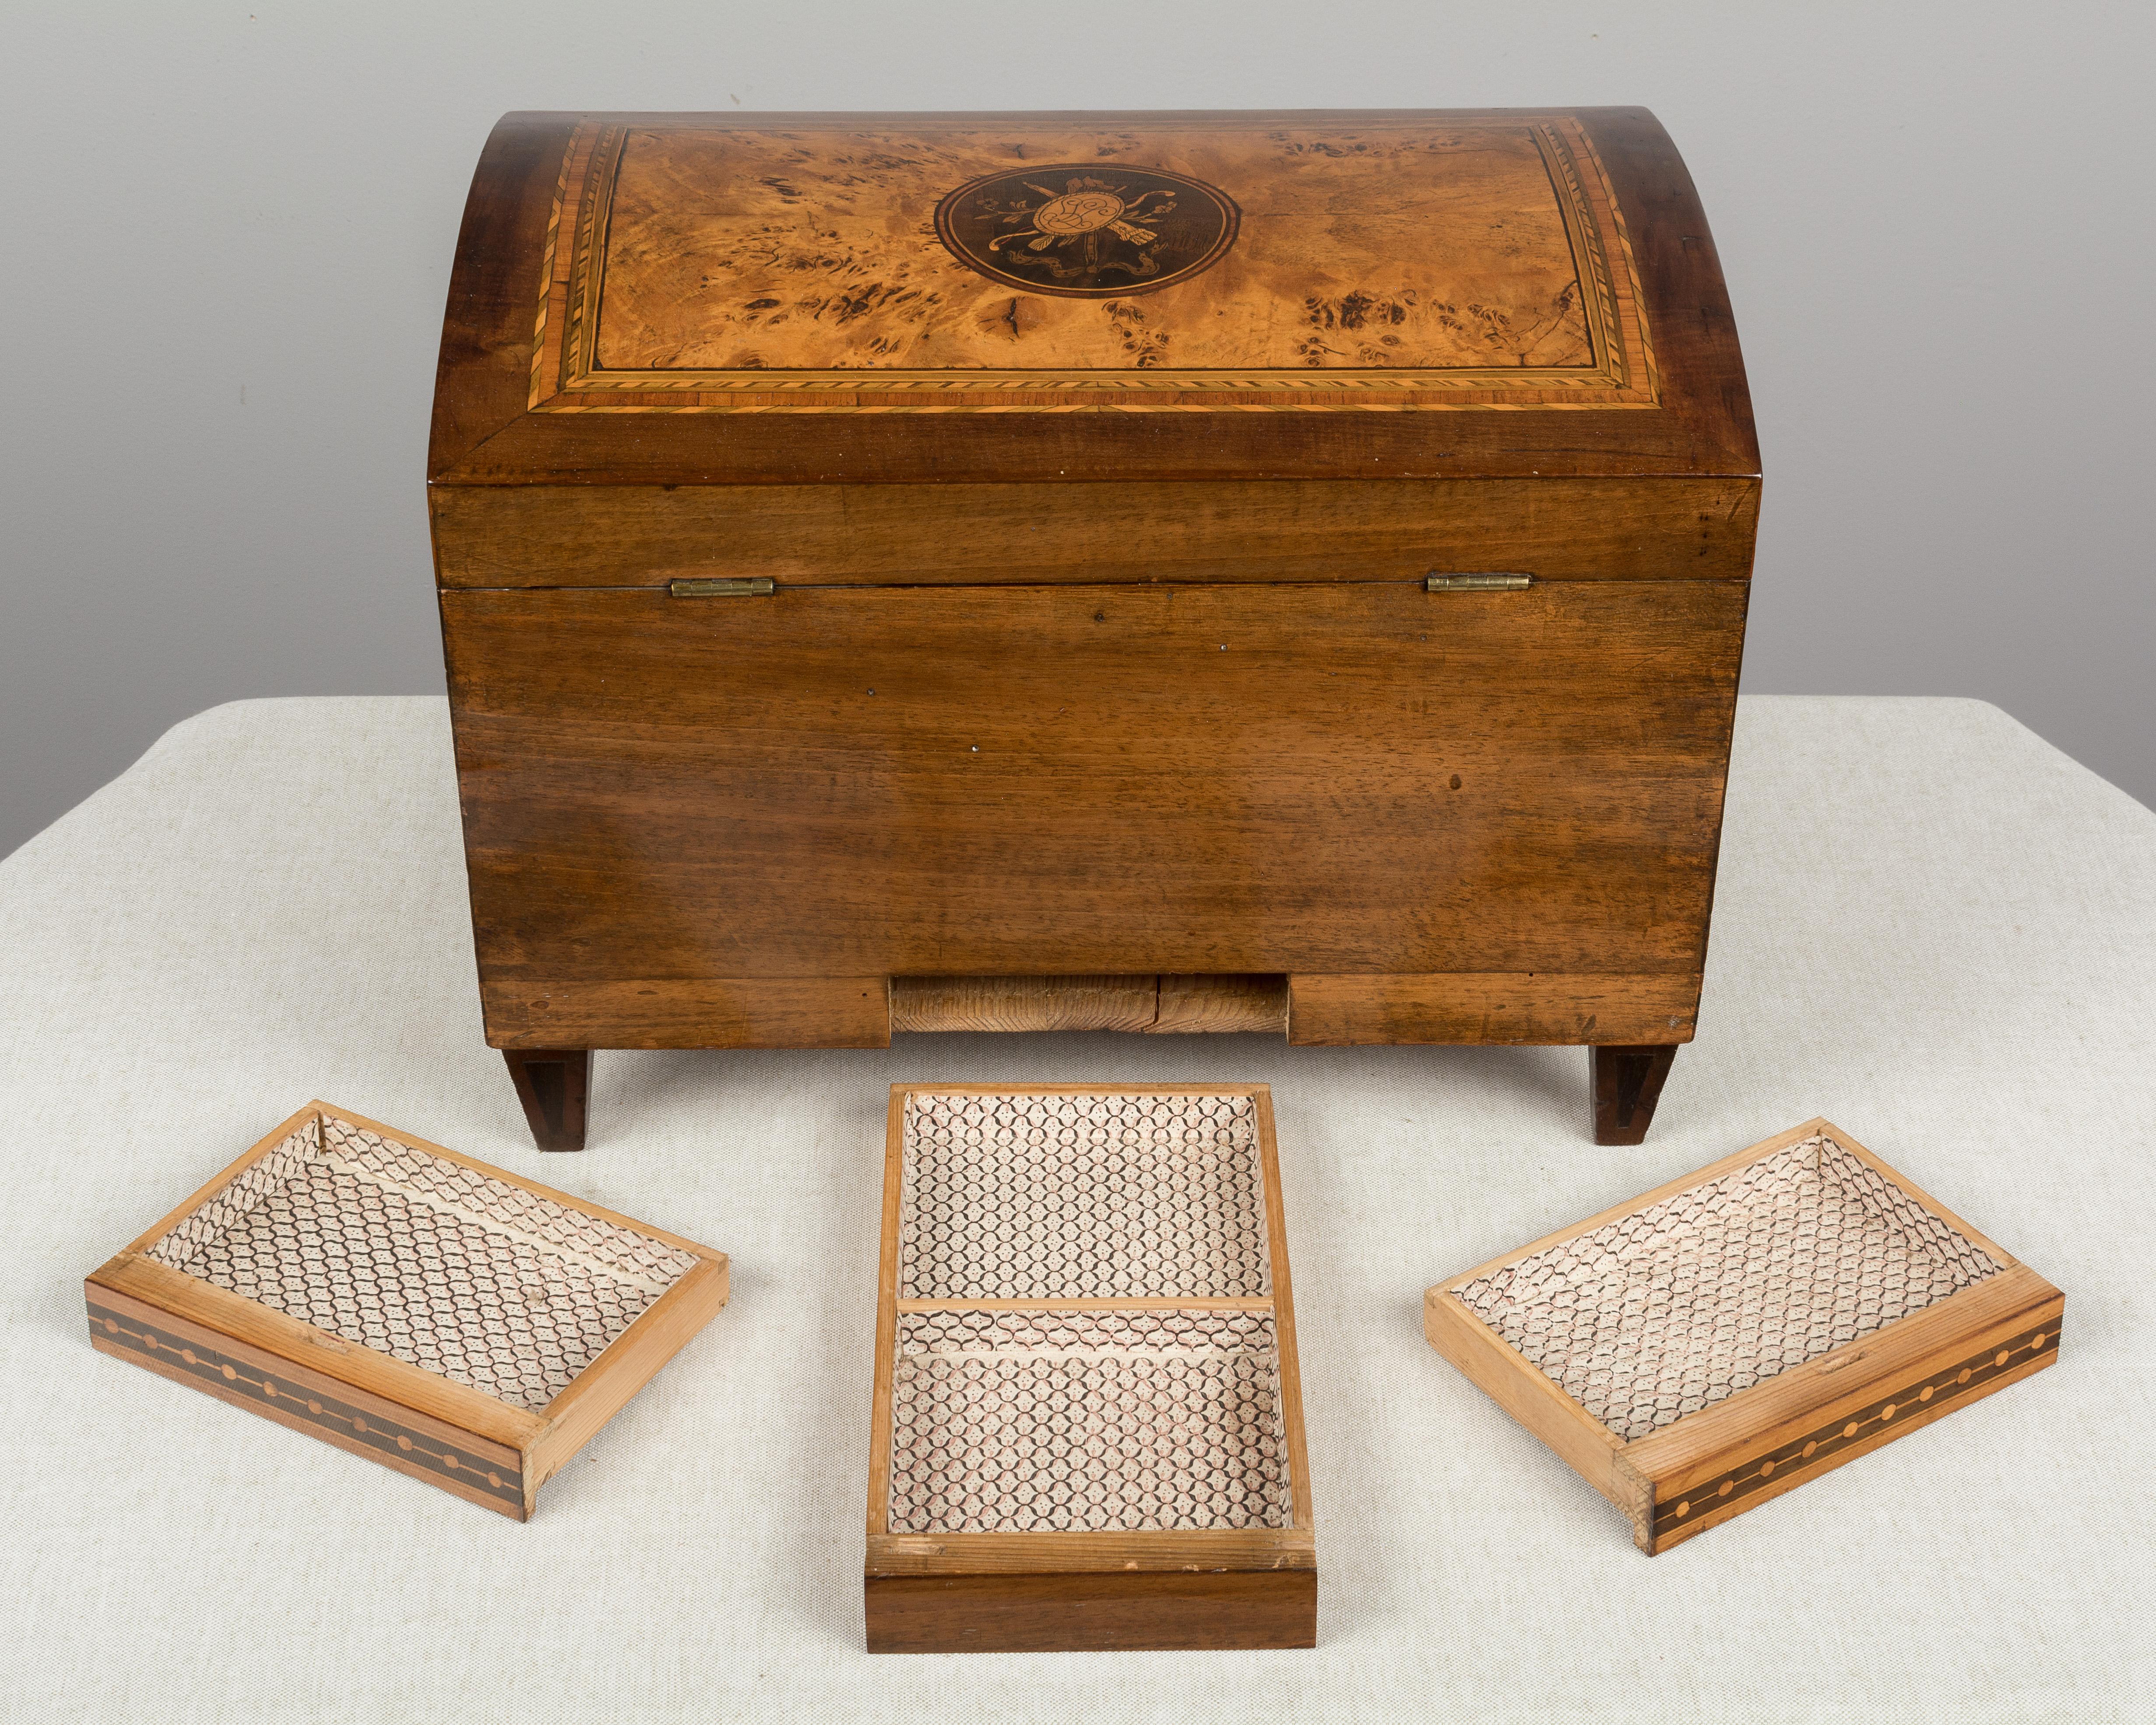 19th Century Italian Marquetry Box For Sale 7